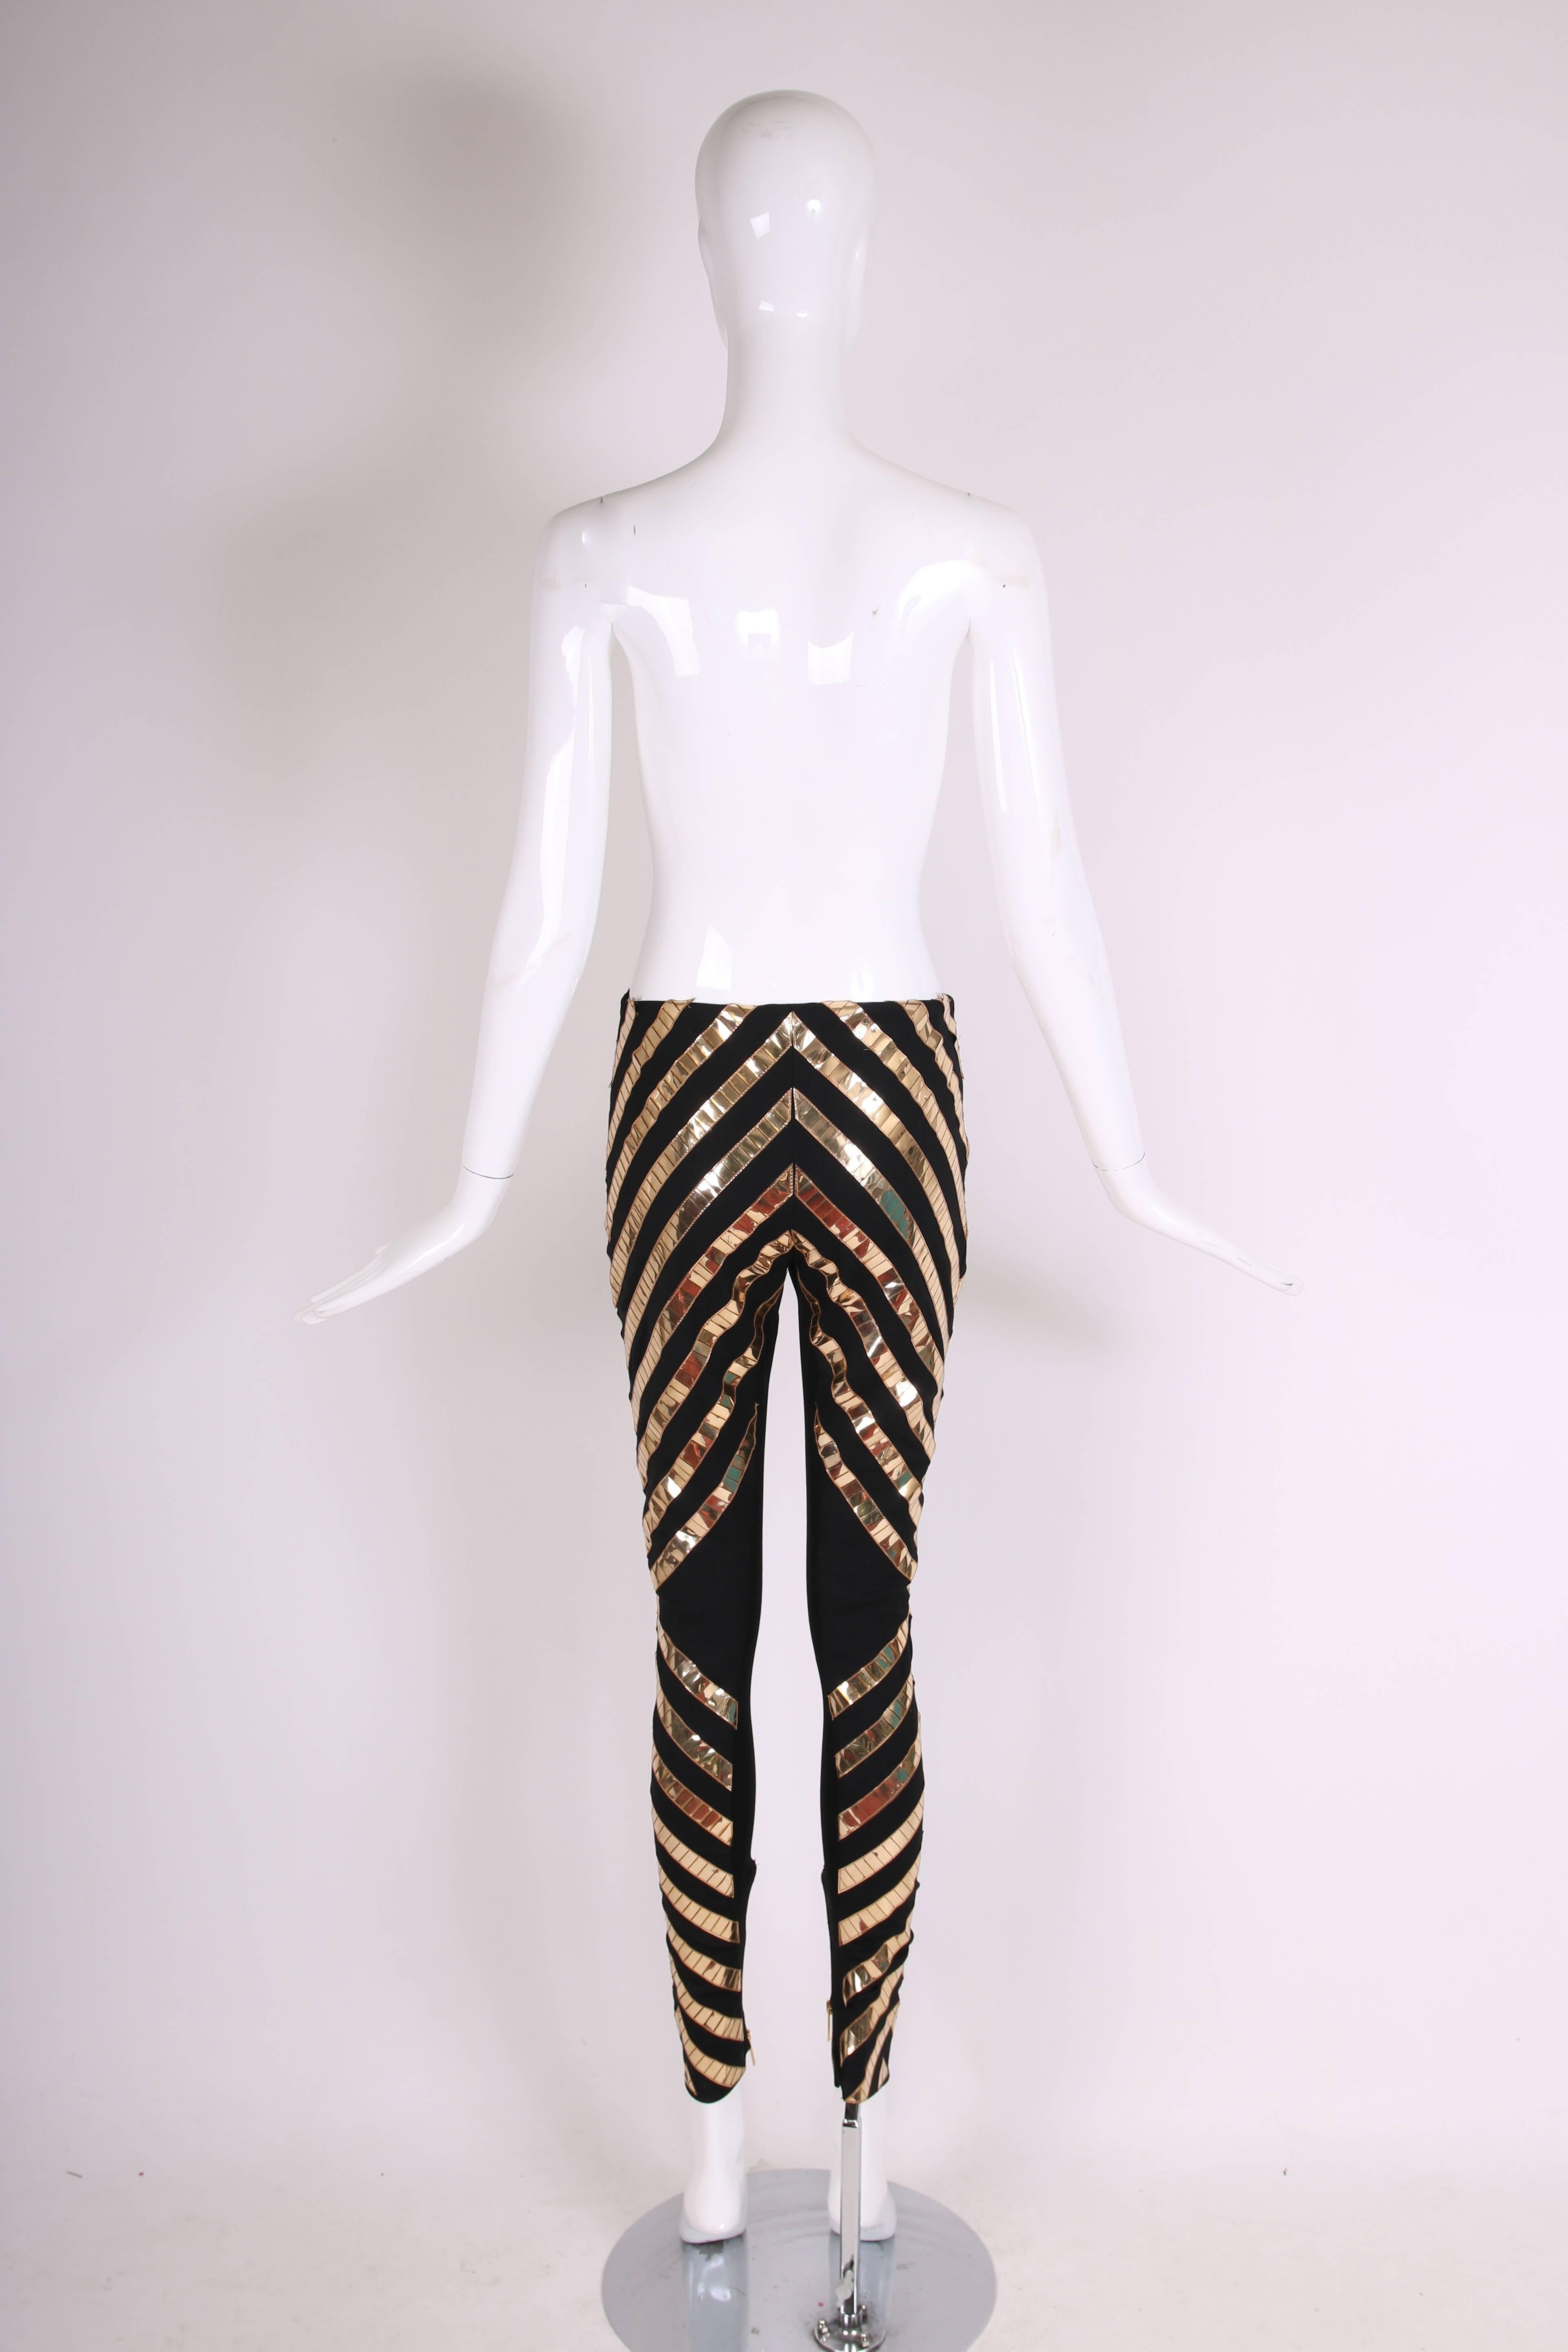 Women's 2011 Gareth Pugh Gold and Black Stretch Pants with Zippers at Ankle